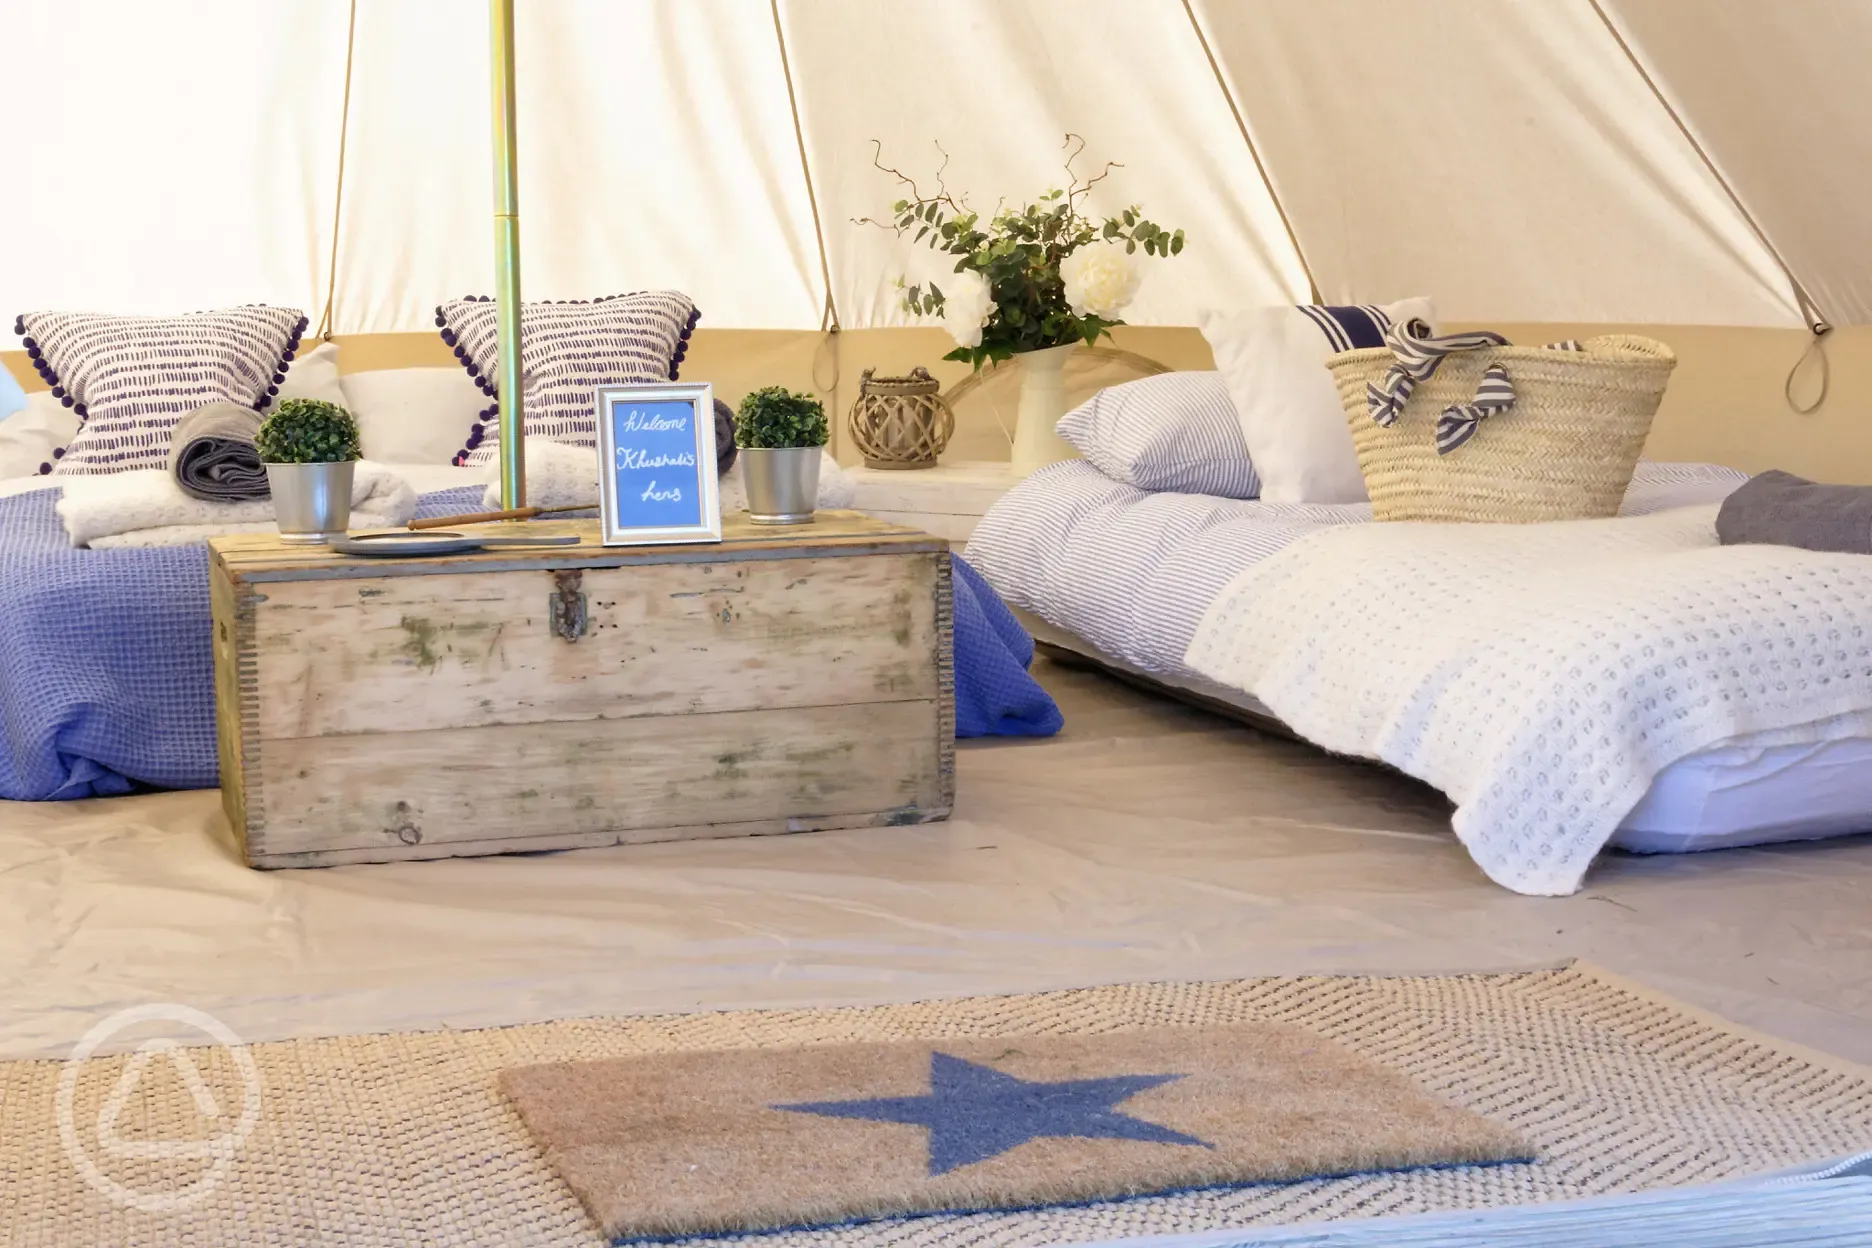 Our stylish bell tents are open April- September 